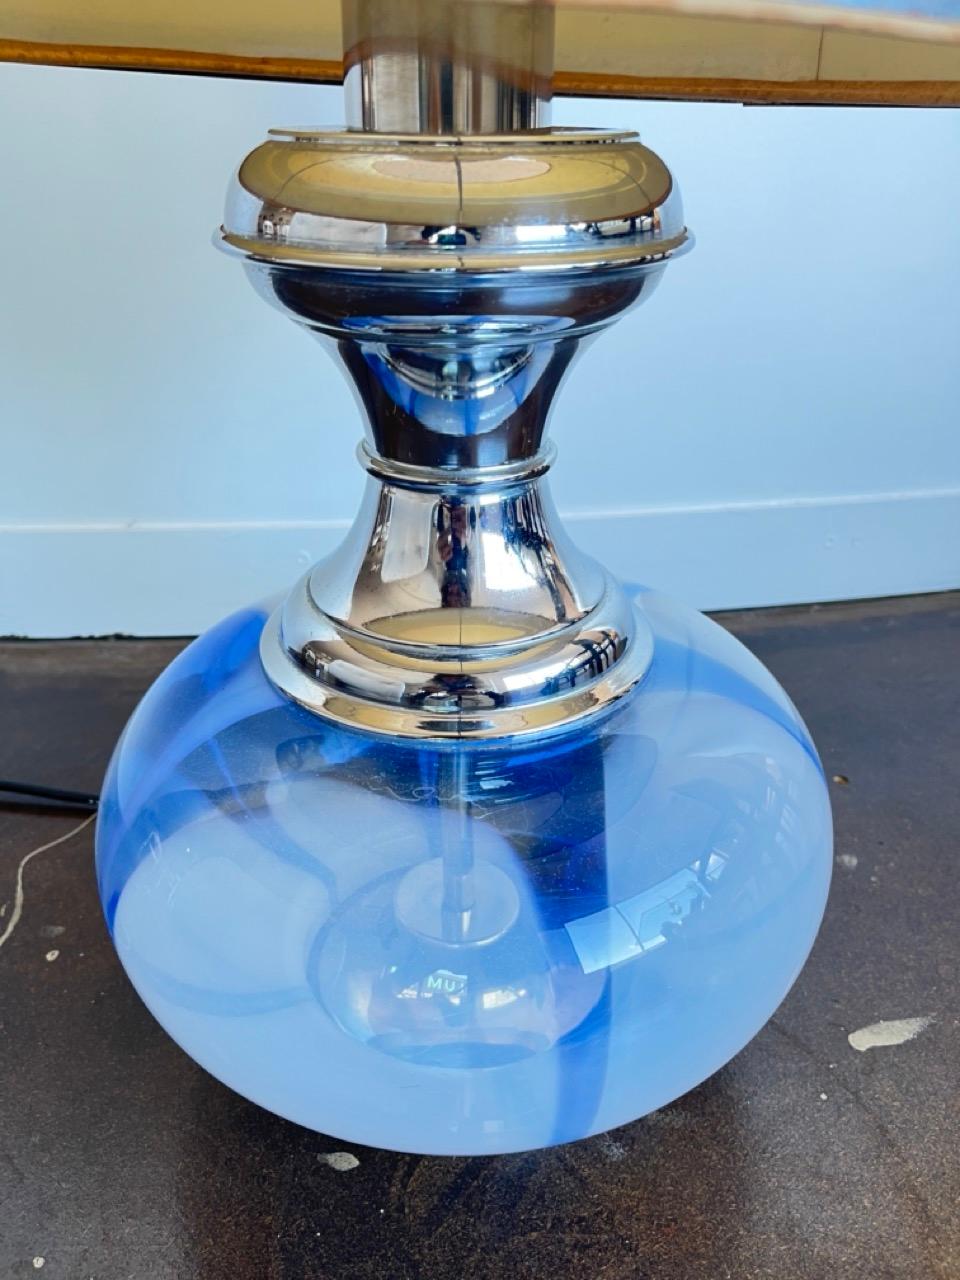 Italian Blown Glass and Chrome Table Lamp 1970s

68cm tall with lampshade 